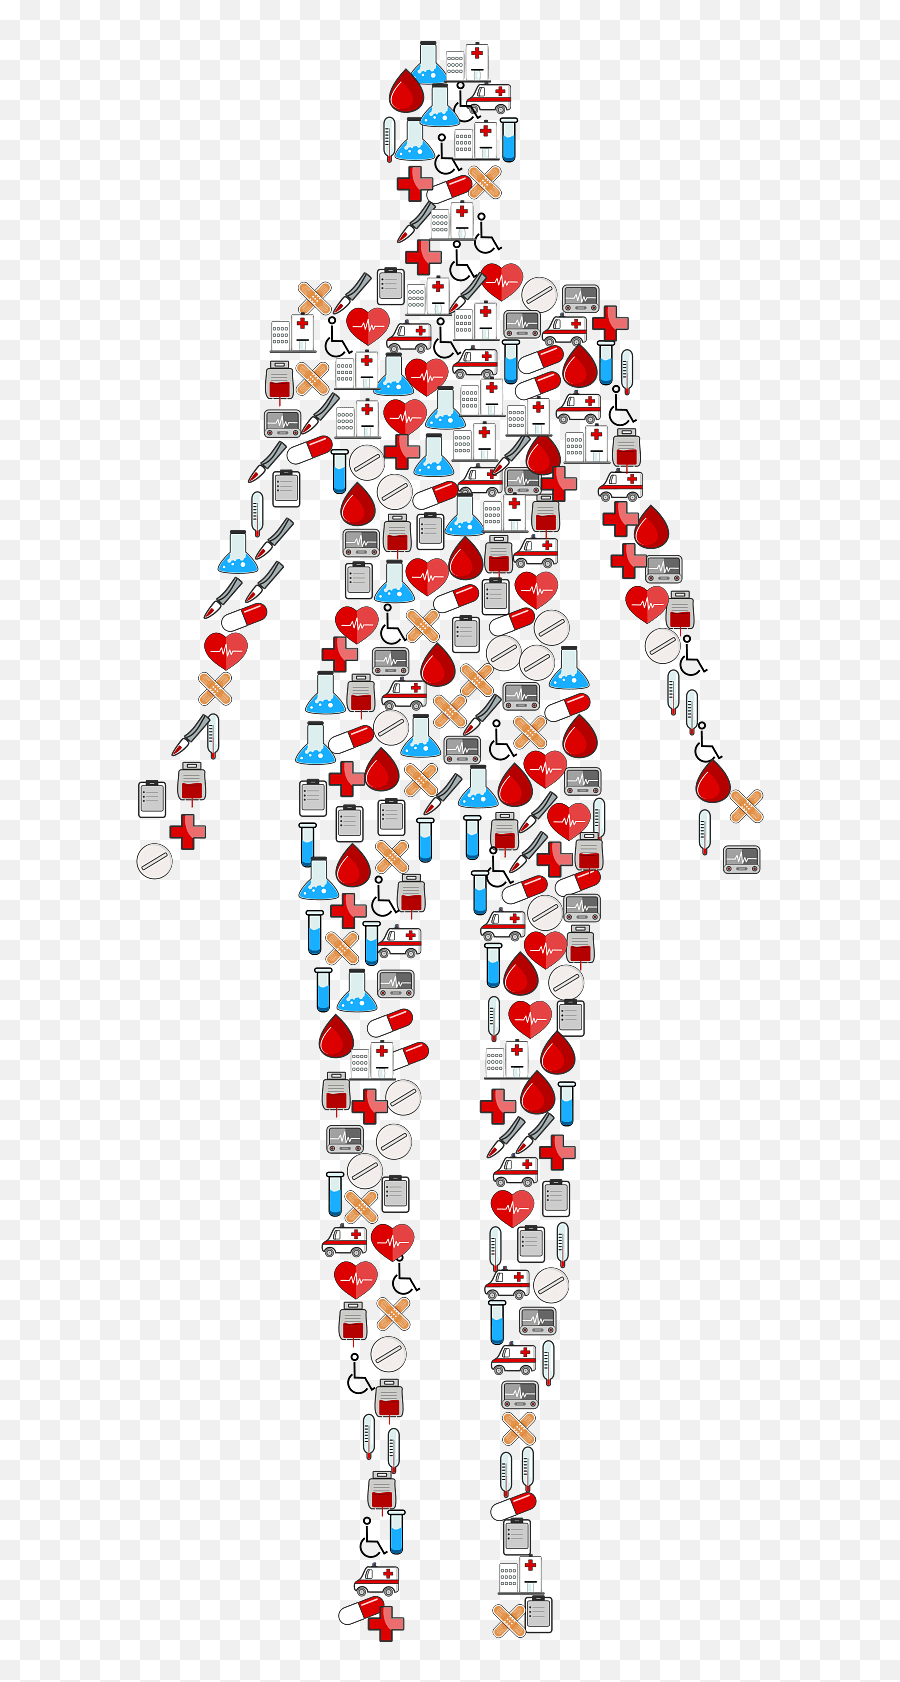 Human Body Made With Medical Icons Transparent Png - Stickpng Human Body Image Icon,Medical Icon